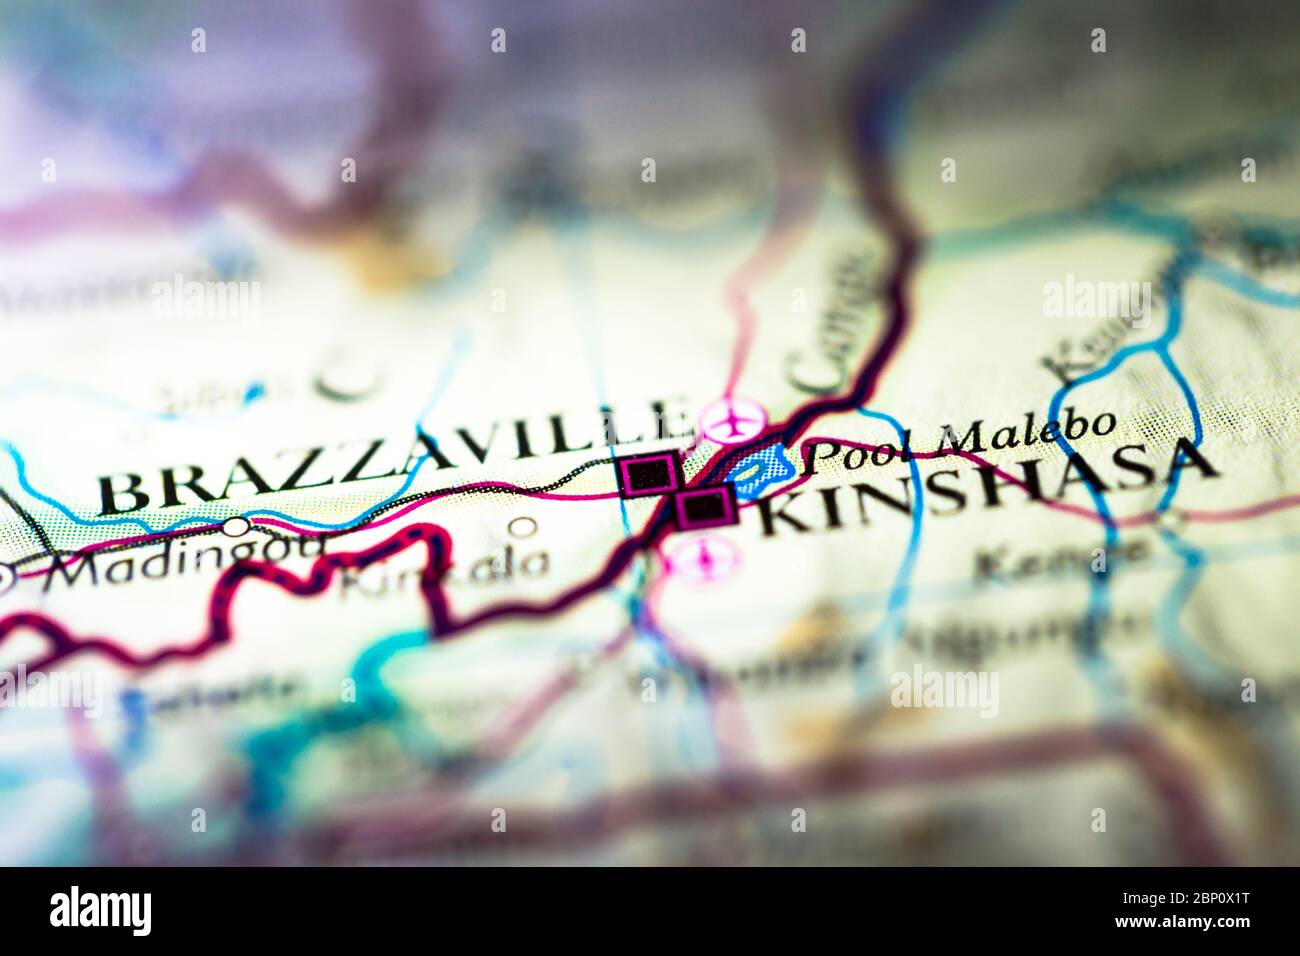 Shallow depth of field focus on geographical map location of Kinshasa Brazzaville twin city in Democratic Republic of the Congo Africa continent on at Stock Photo